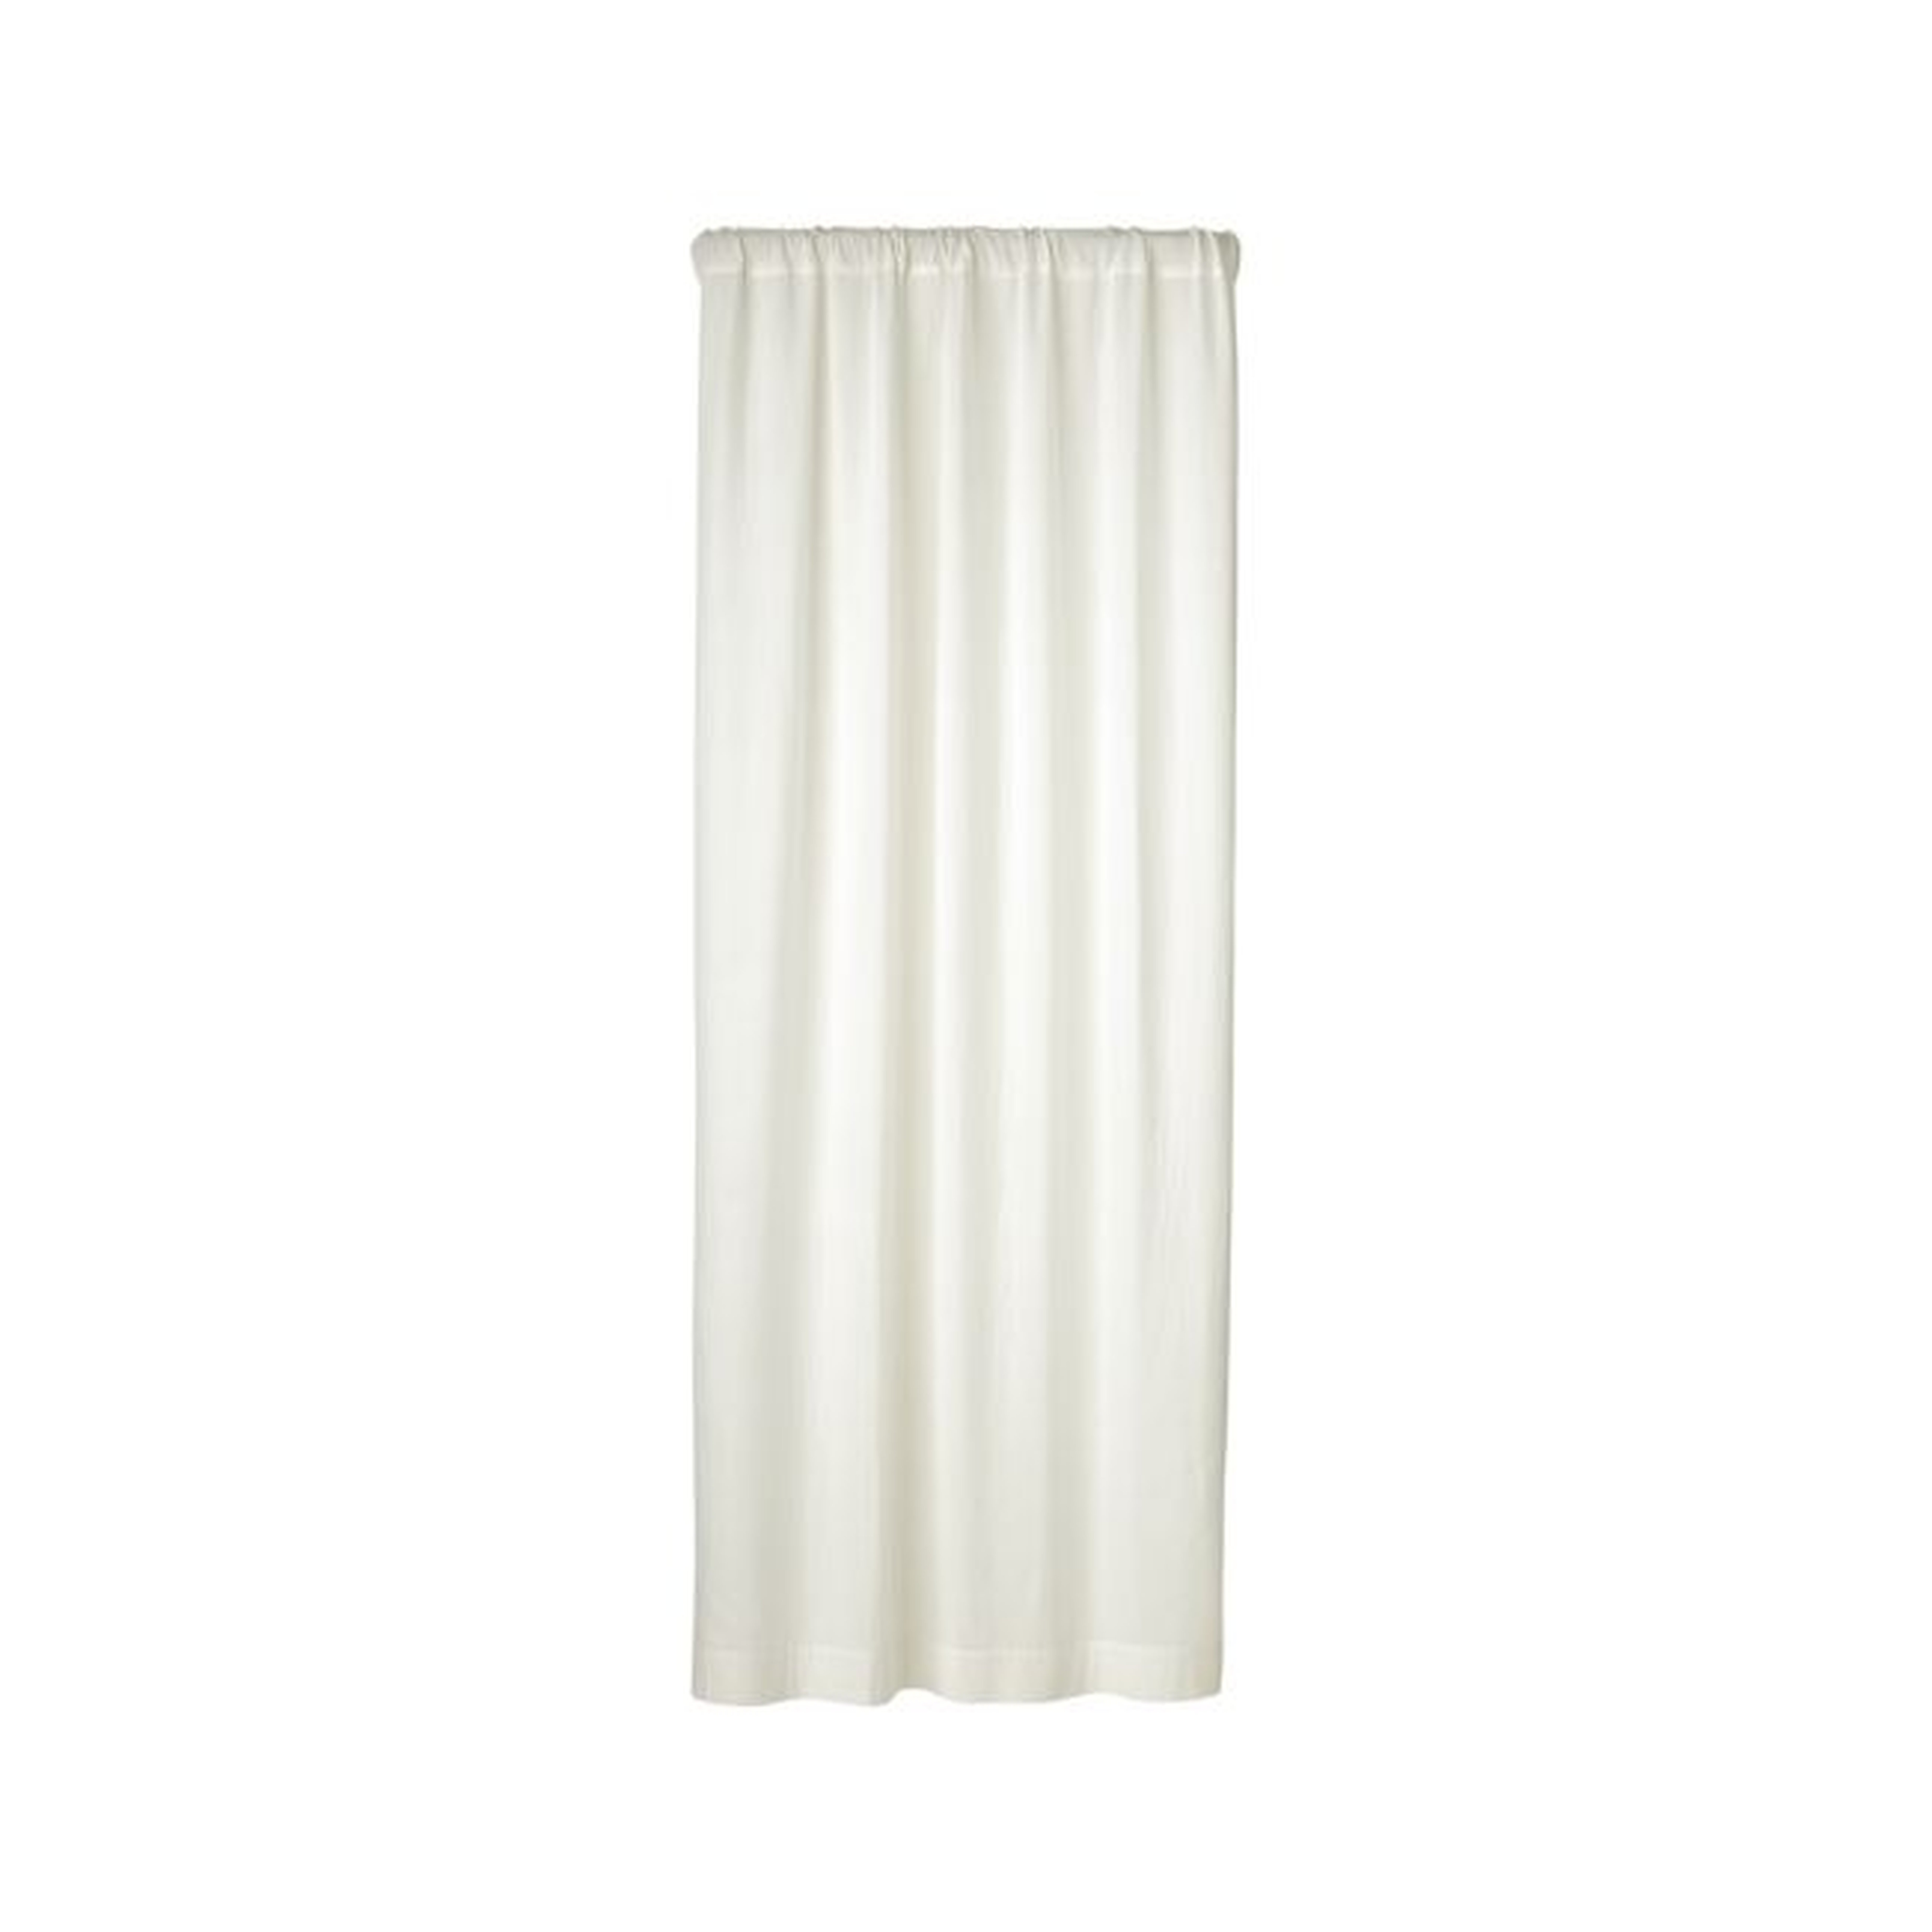 Organic Cotton Double Weave Tofu Sheer Curtain Panel 50 x 84 - Crate and Barrel